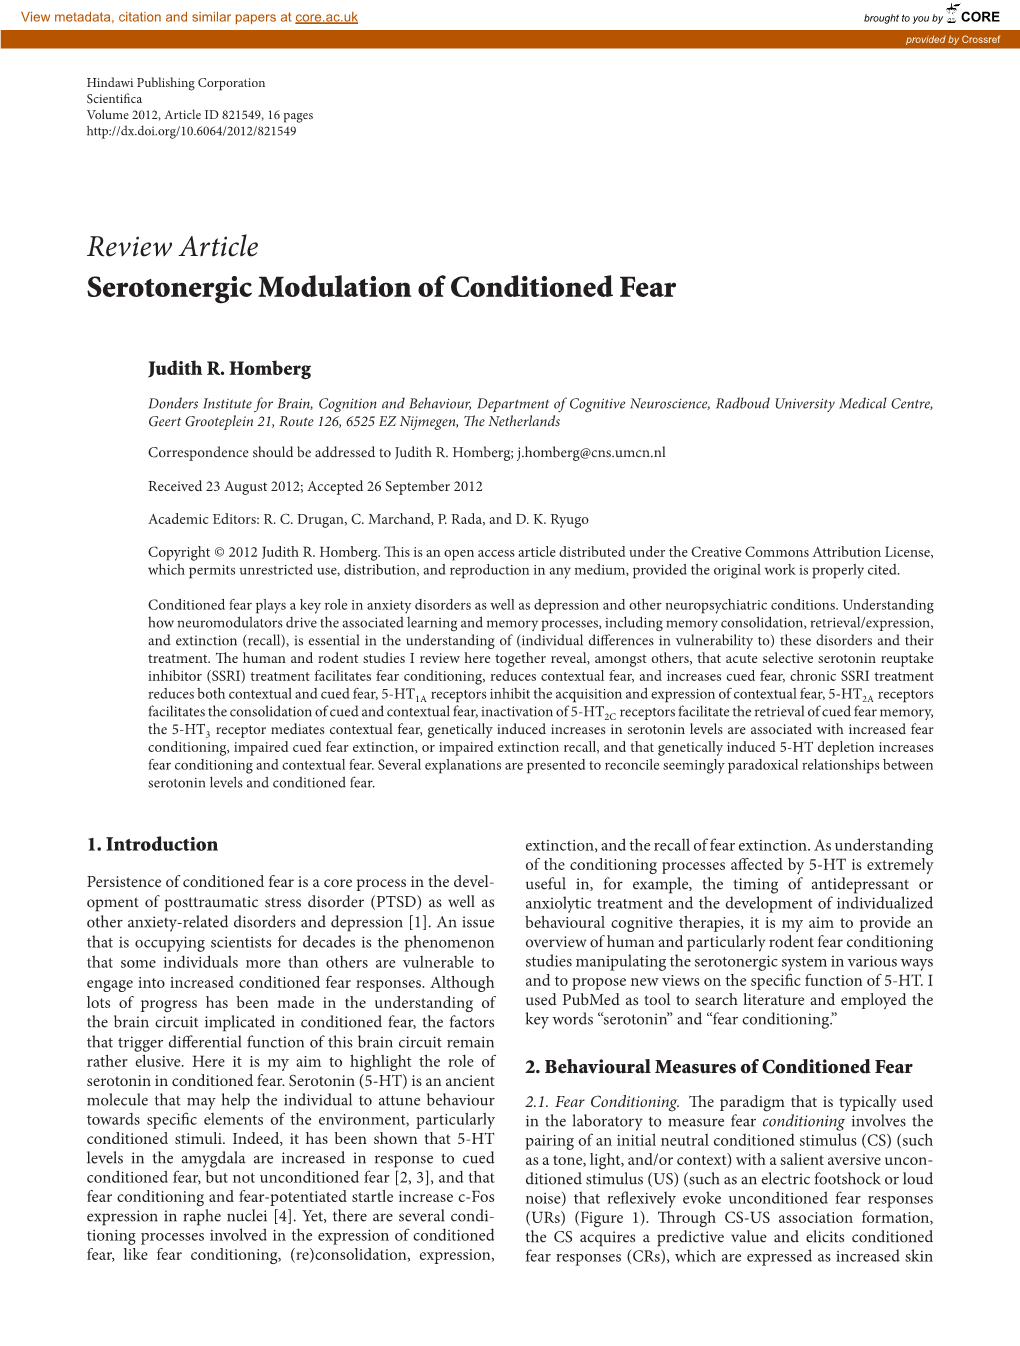 Review Article Serotonergic Modulation of Conditioned Fear